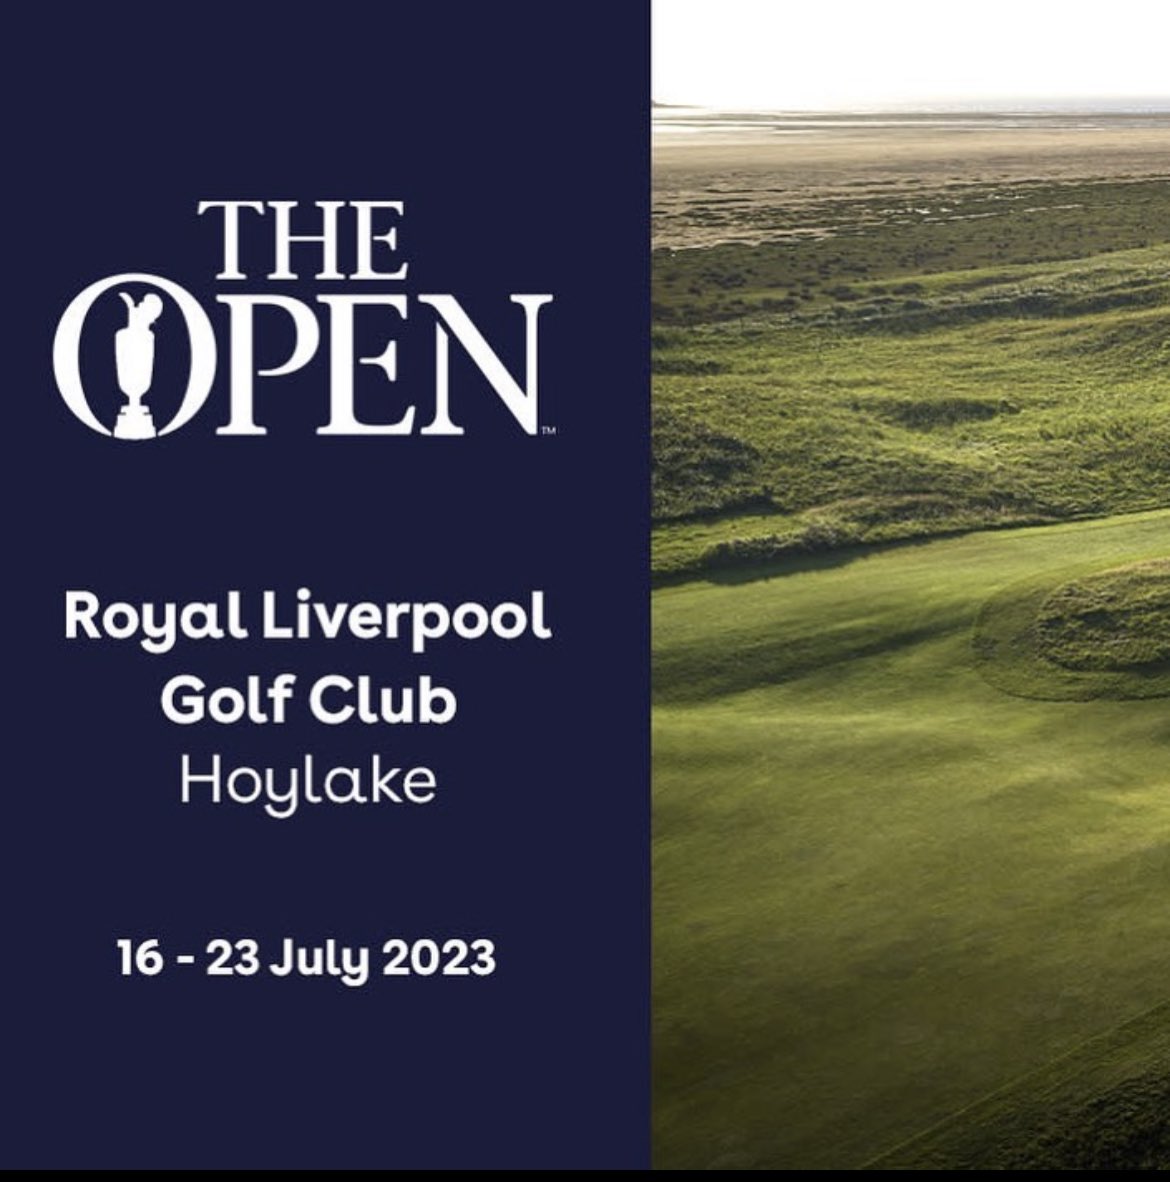 The open is back @RLGCHoylake truly putting #Hoylake back on the map. Help #supportlocal businesses and let’s make it amazing for everyone. #golf #open2023 #wirral #westkirby #heswall